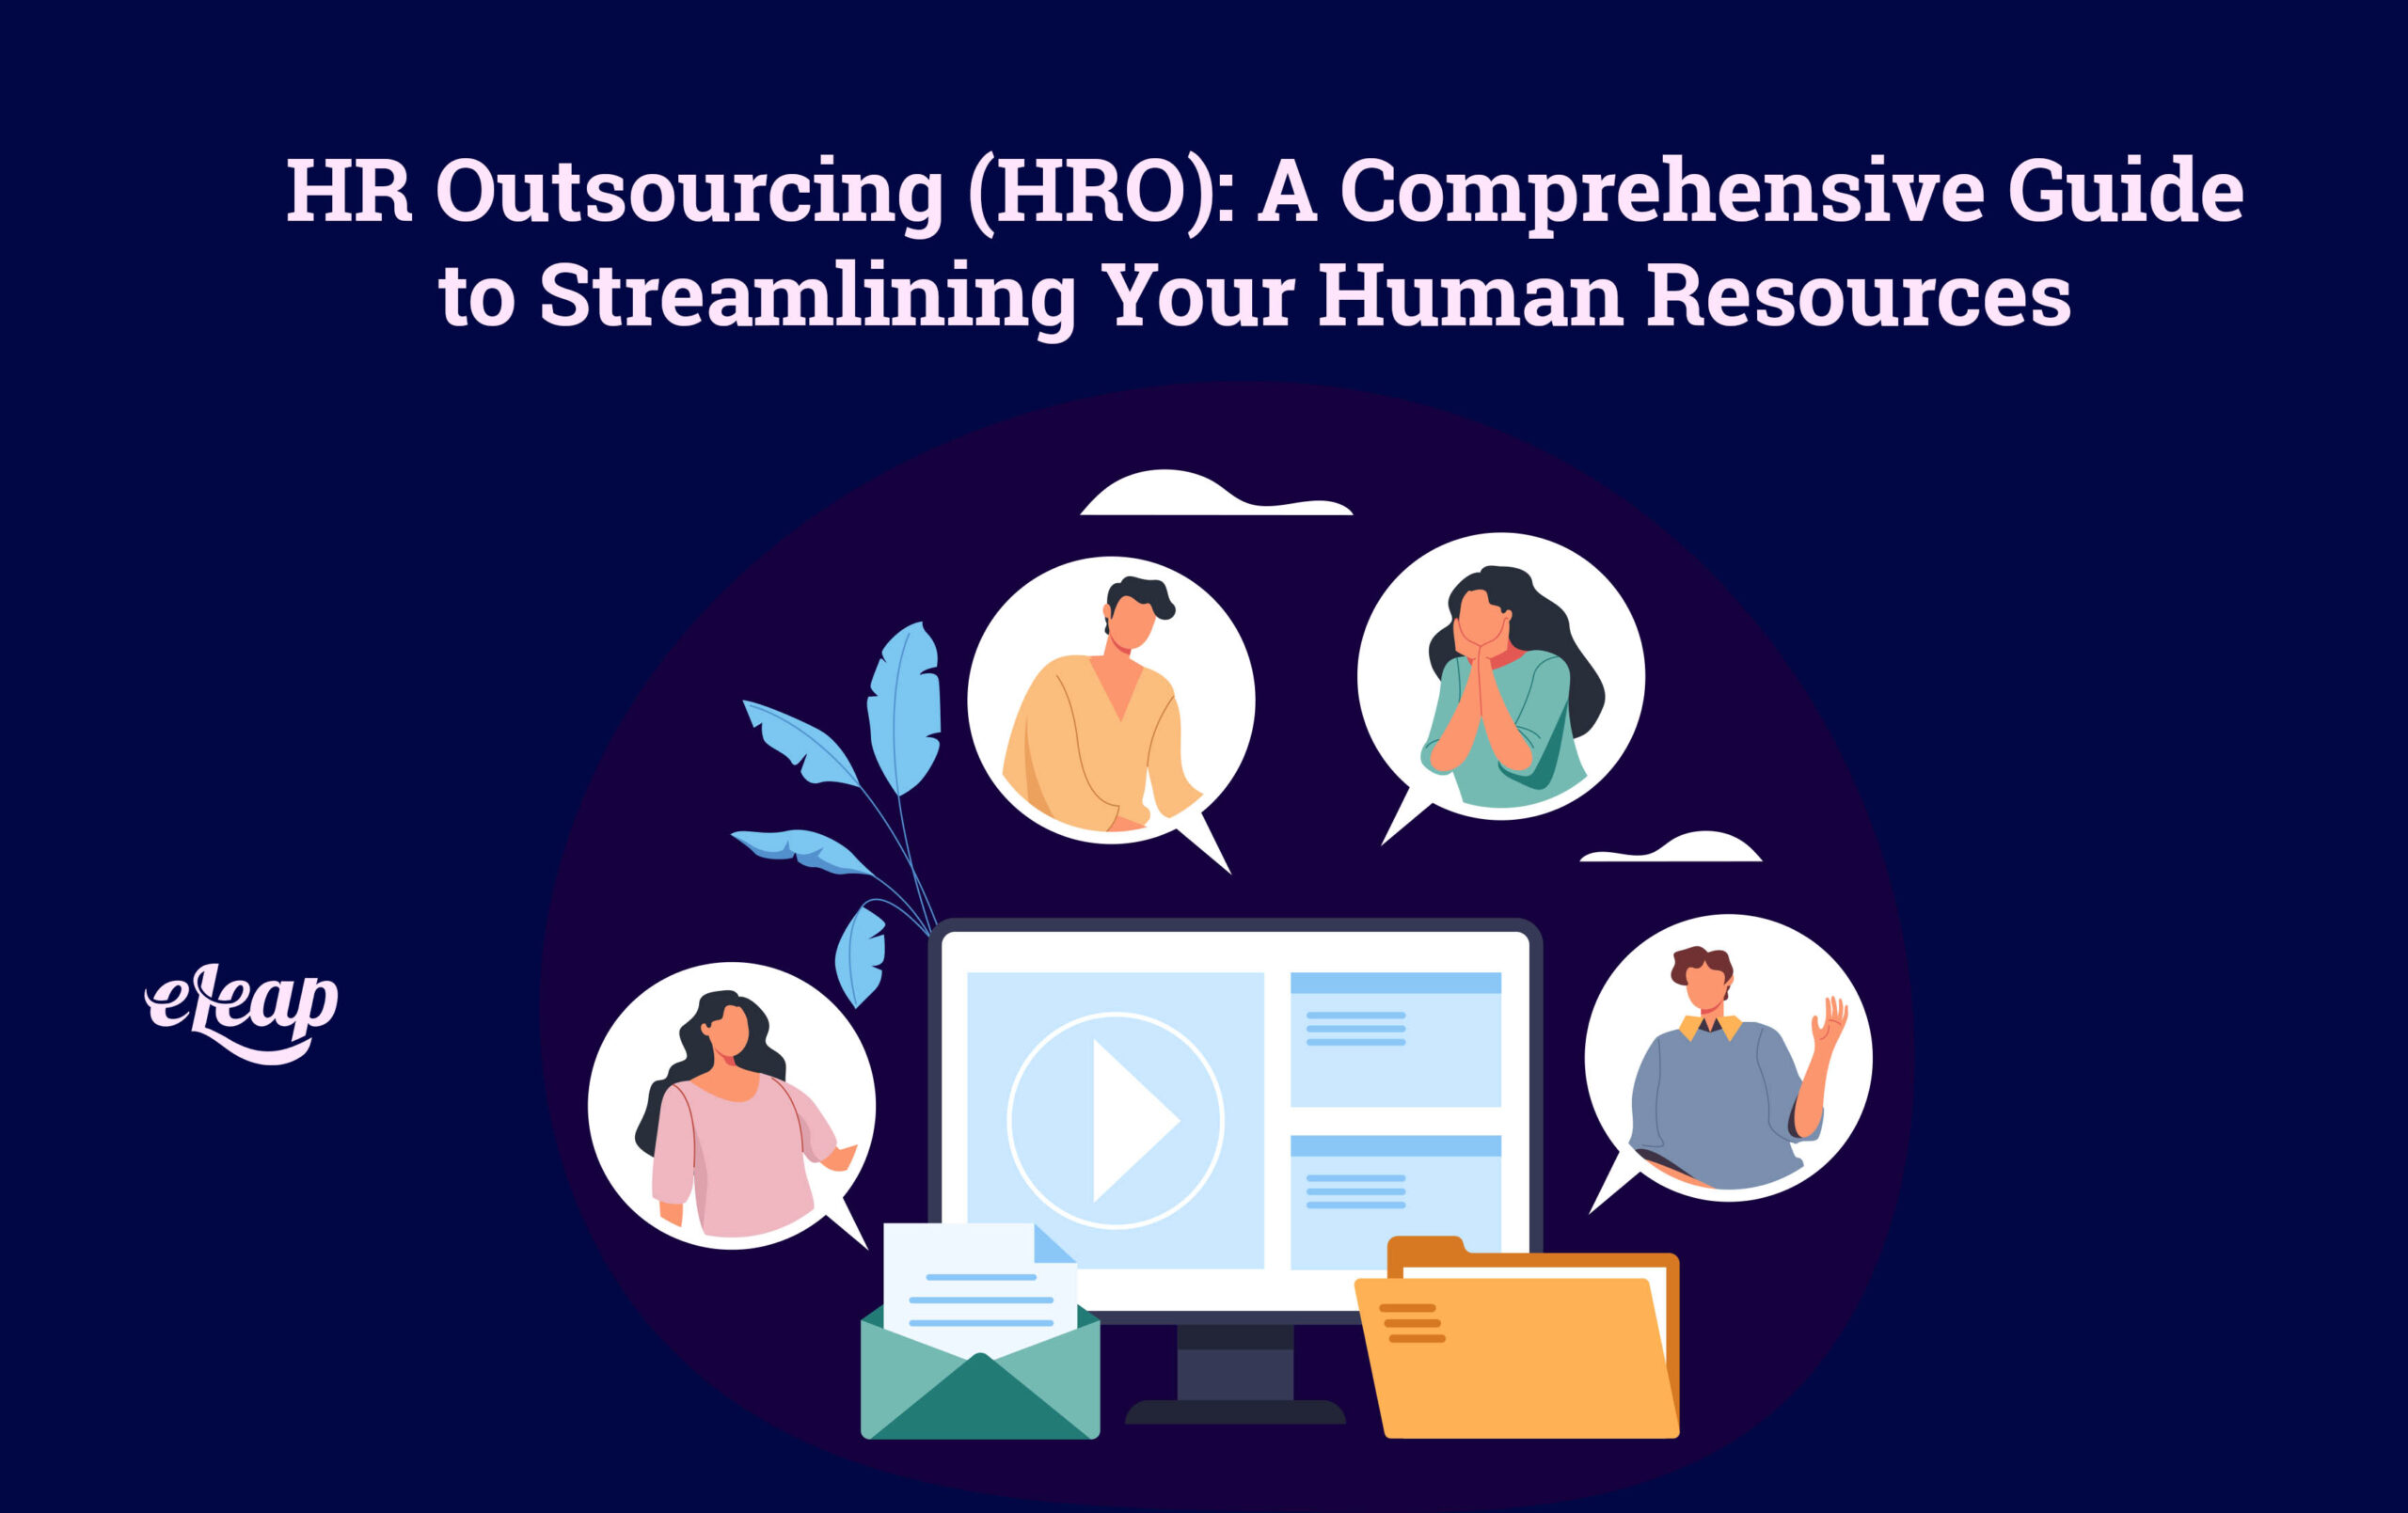 HR Outsourcing (HRO)